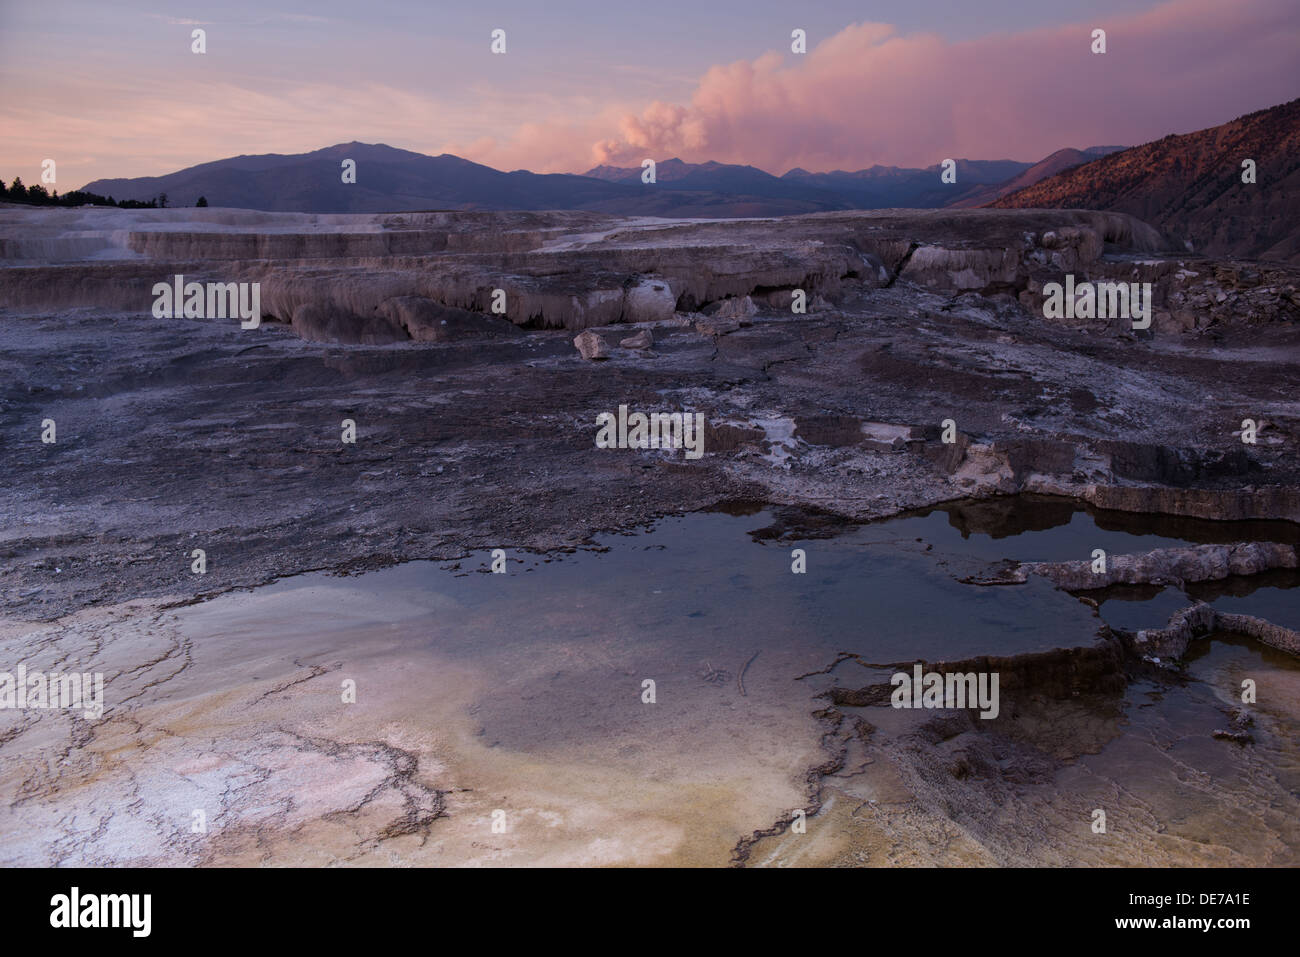 Photograph of the sunset over Mammoth Hot Springs with a plume of smoke from a wildfire in the background. Stock Photo